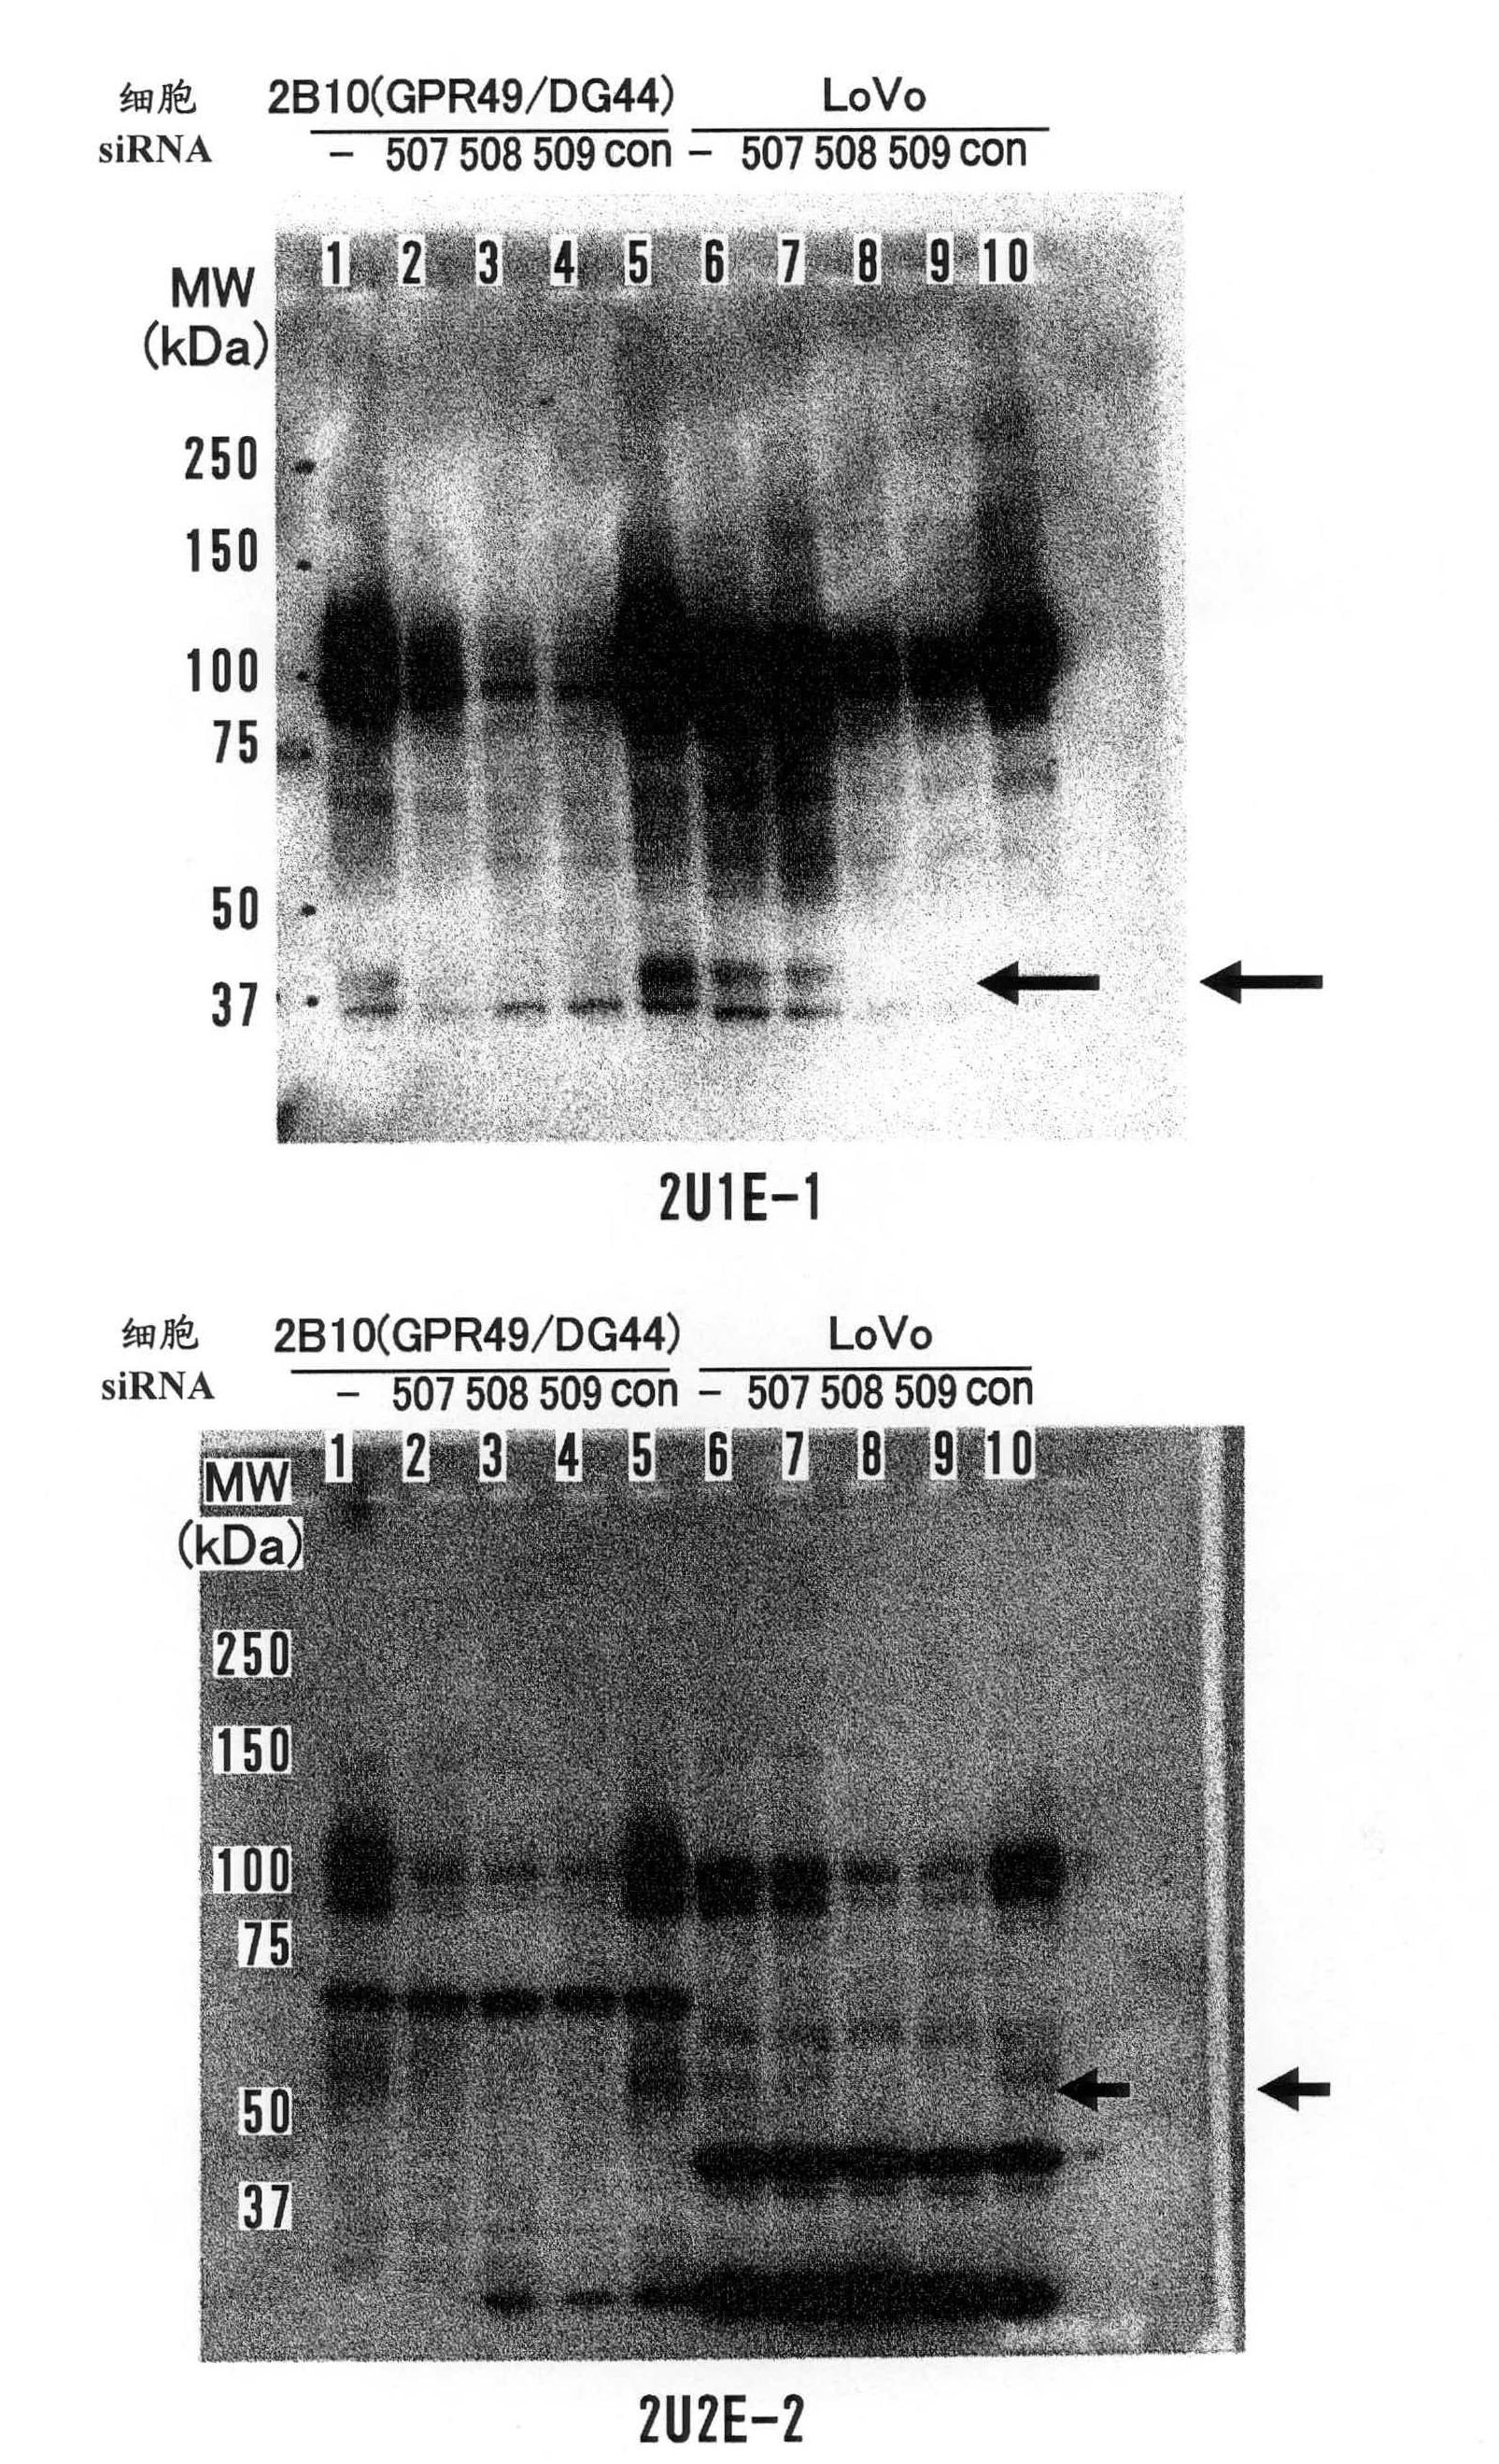 Diagnosis and treatment of cancer using anti-GPR49 antibody